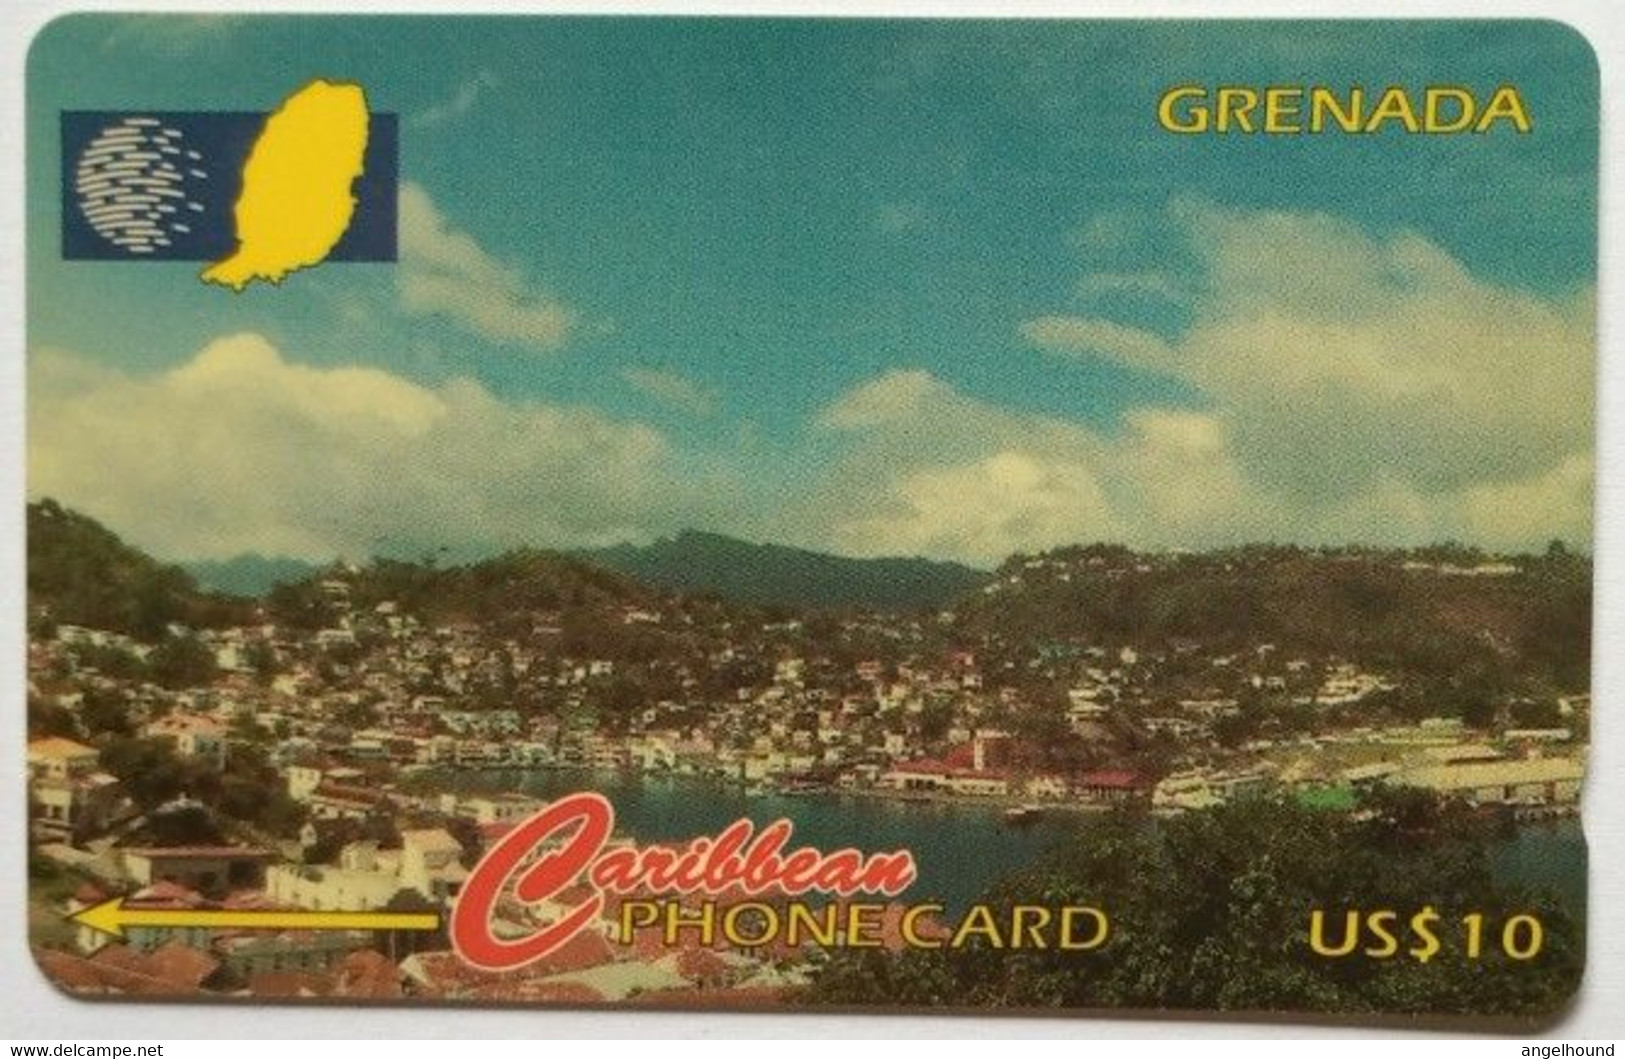 Grenada Cable And Wireless US$10 136CGRA " View Of St. George Harbour" - Grenade